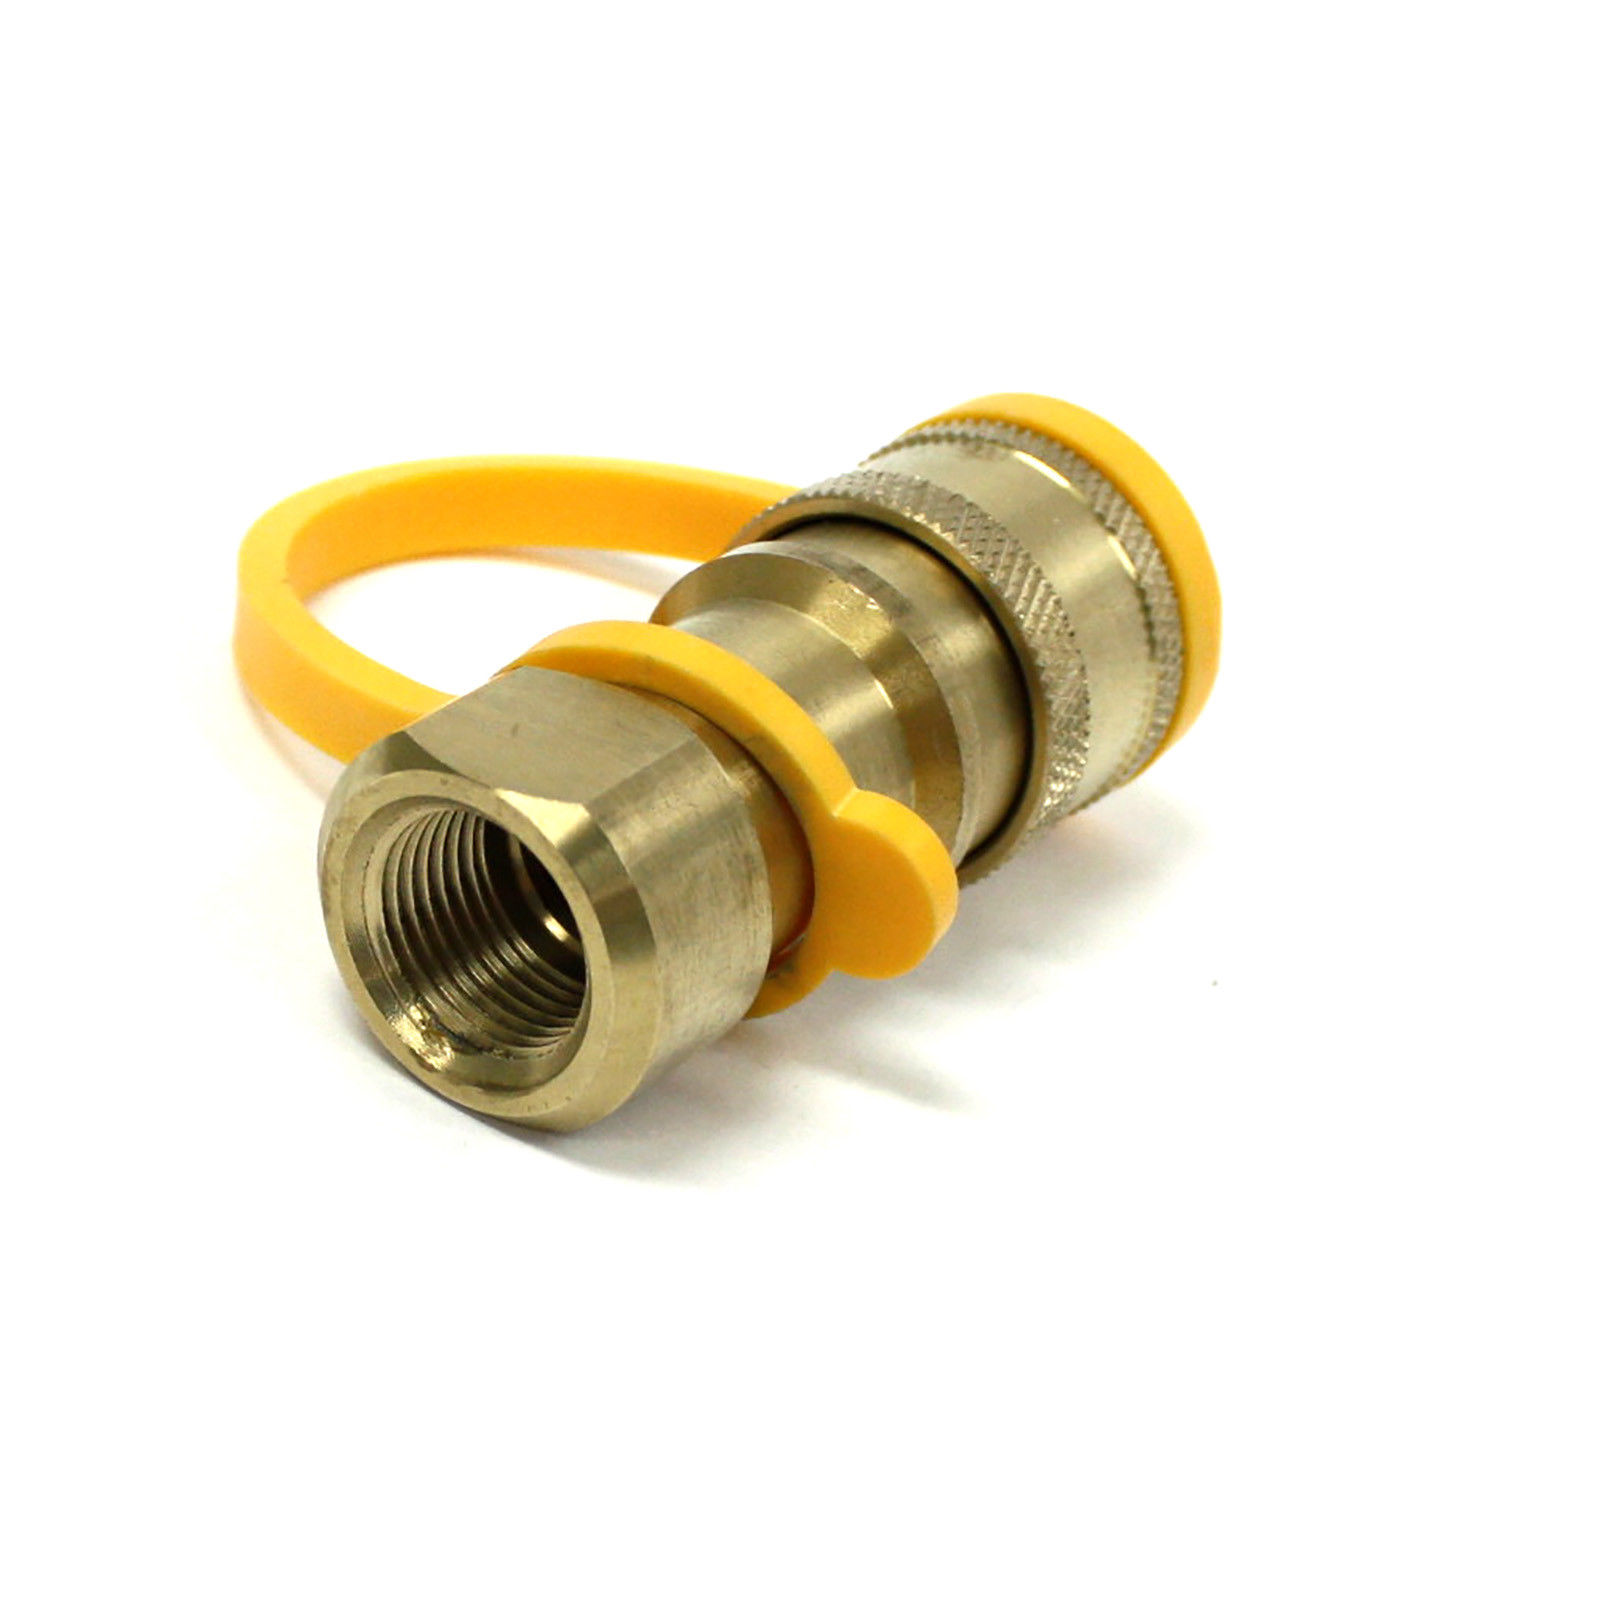 3/8 inch Female Pipe Thread x 3/8 inch Male Flare GasSaf Universal Propane Natural Gas Quick Connector Solid Brass Disconnect kit 